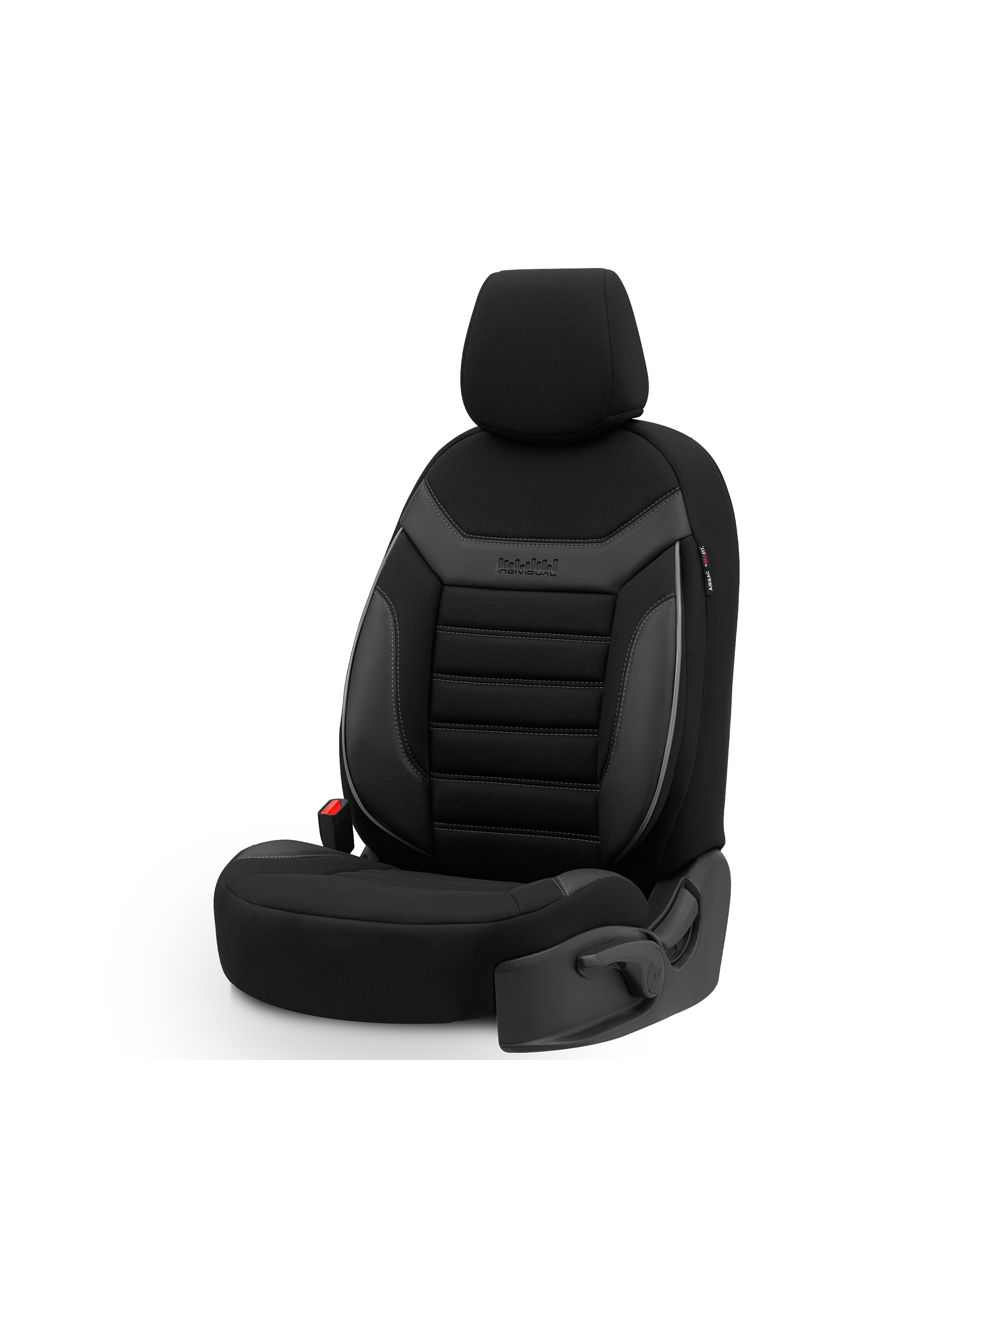 Breathable Car Seat Cushion Materials: Ultimate Comfort for Long Drives